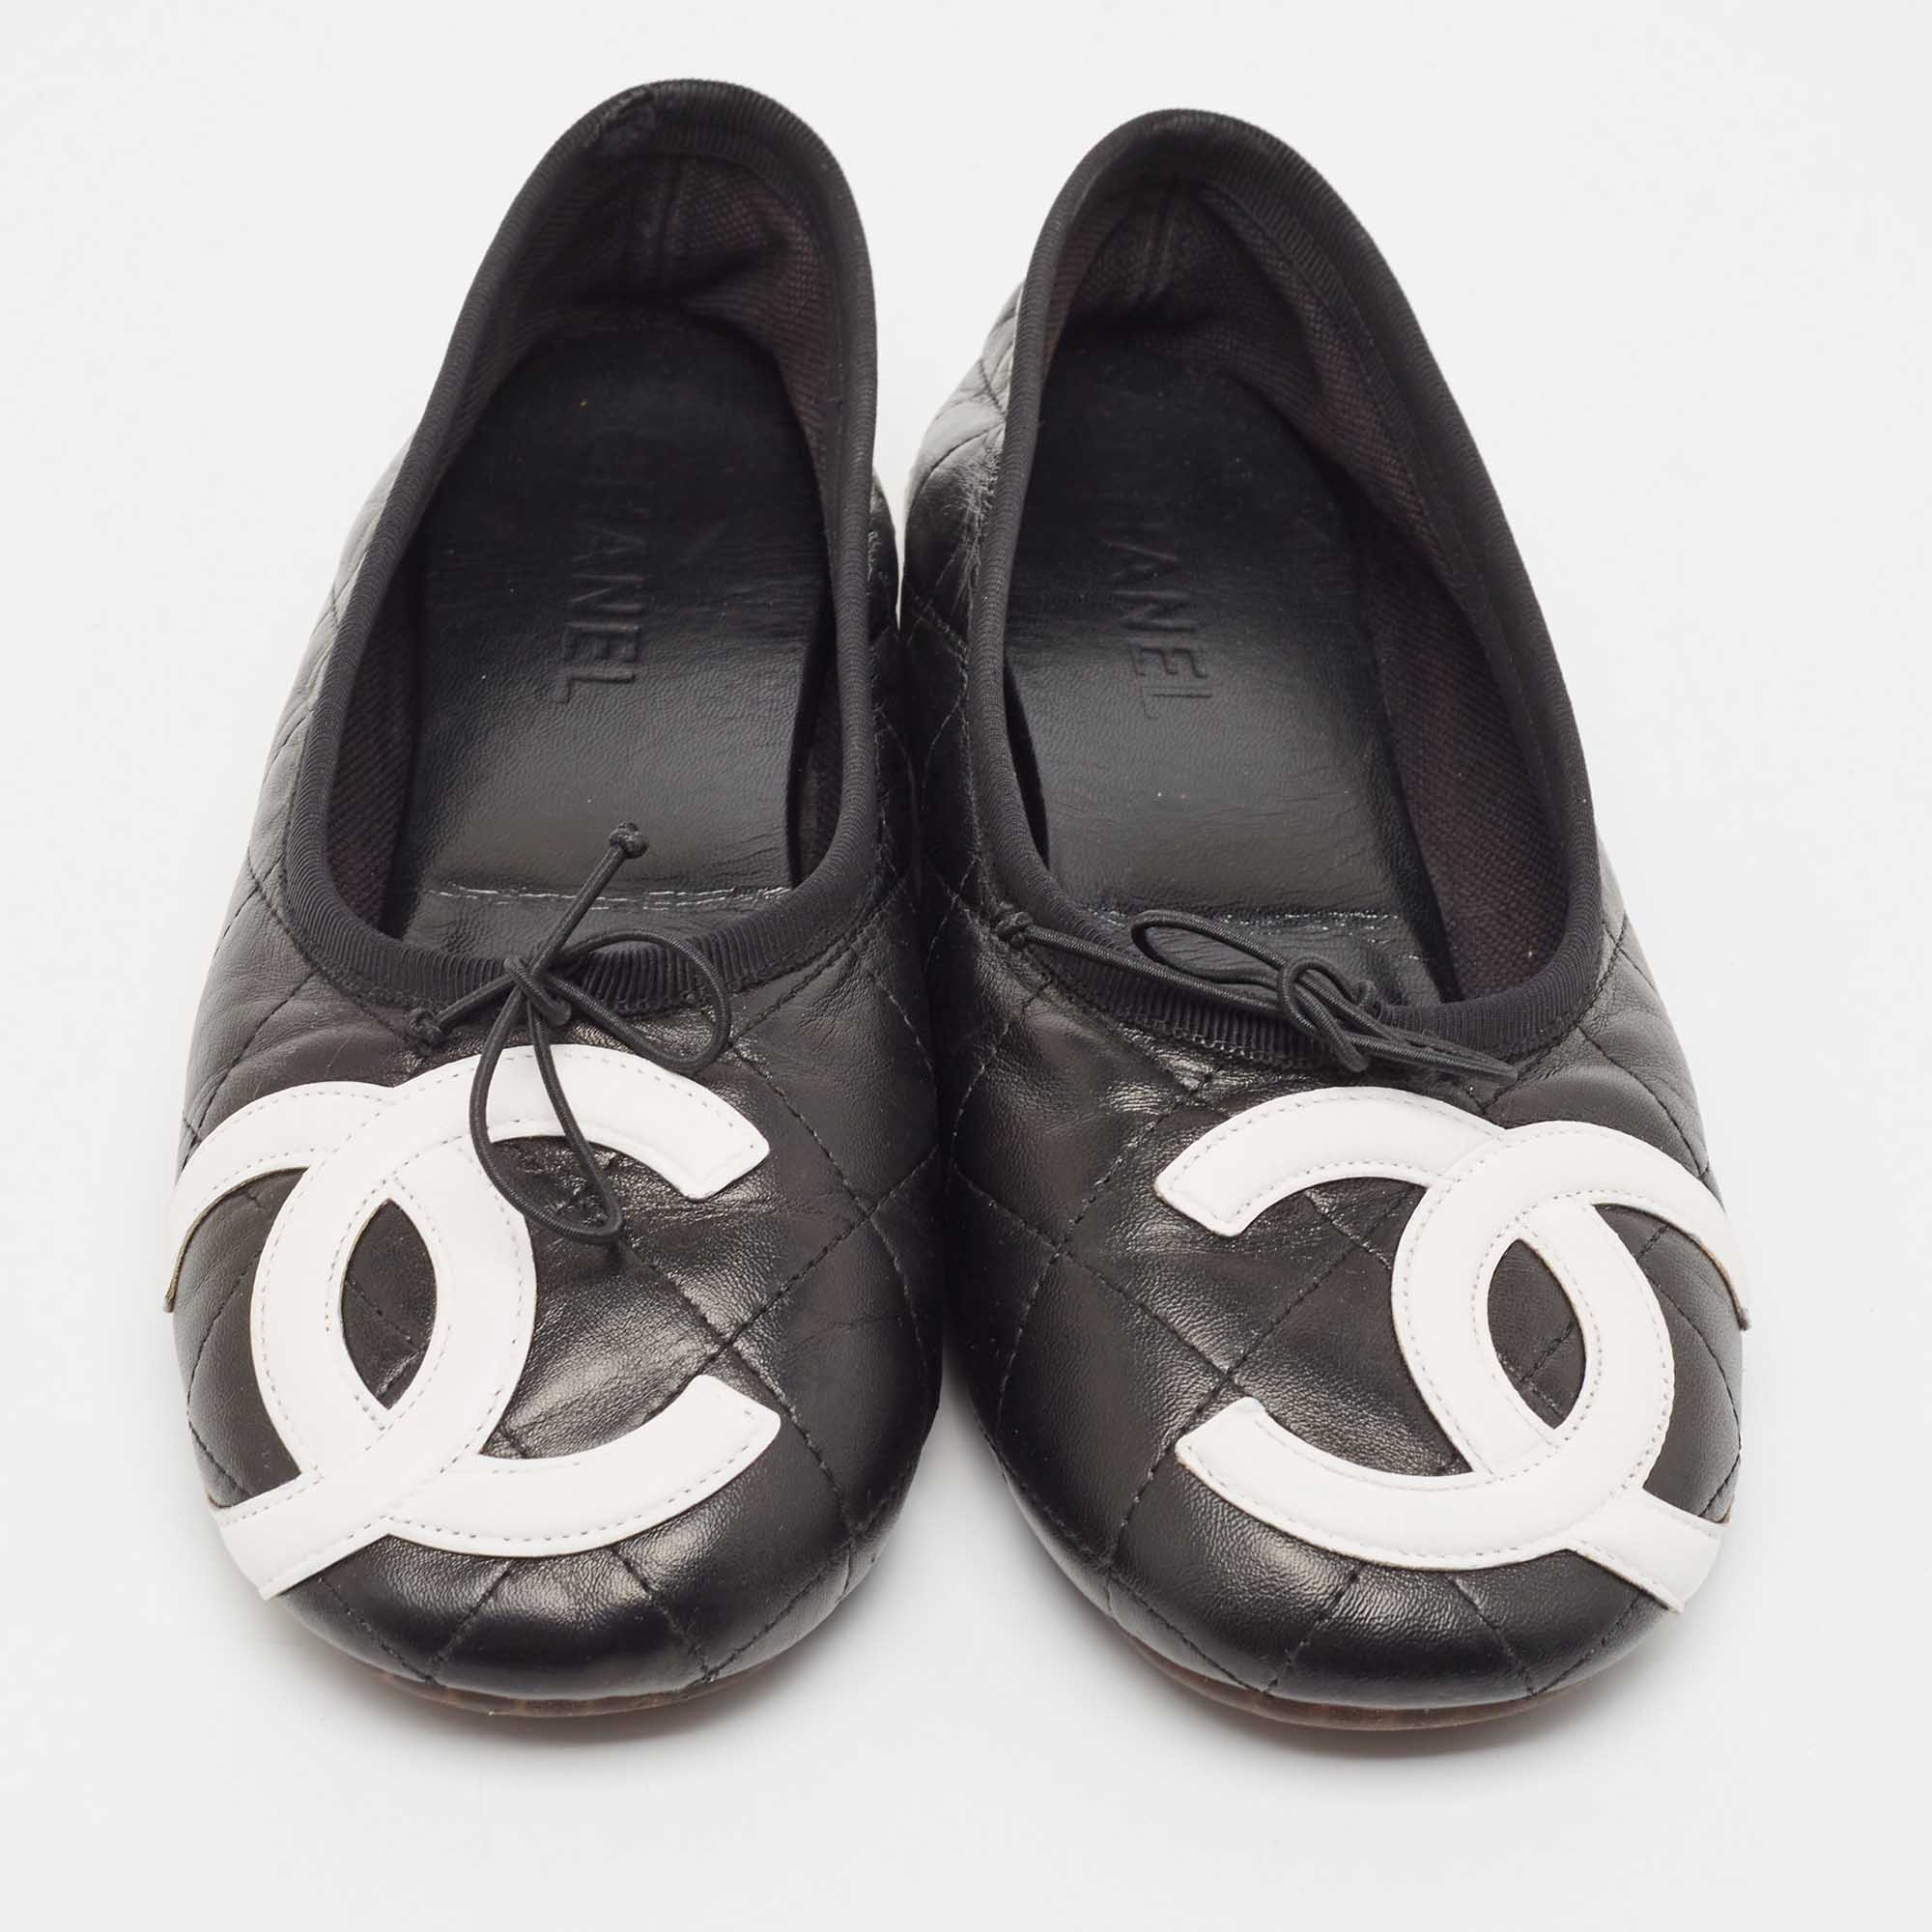 Chanel Black Quilted Leather Cambon Bow Ballet Flats Size 39